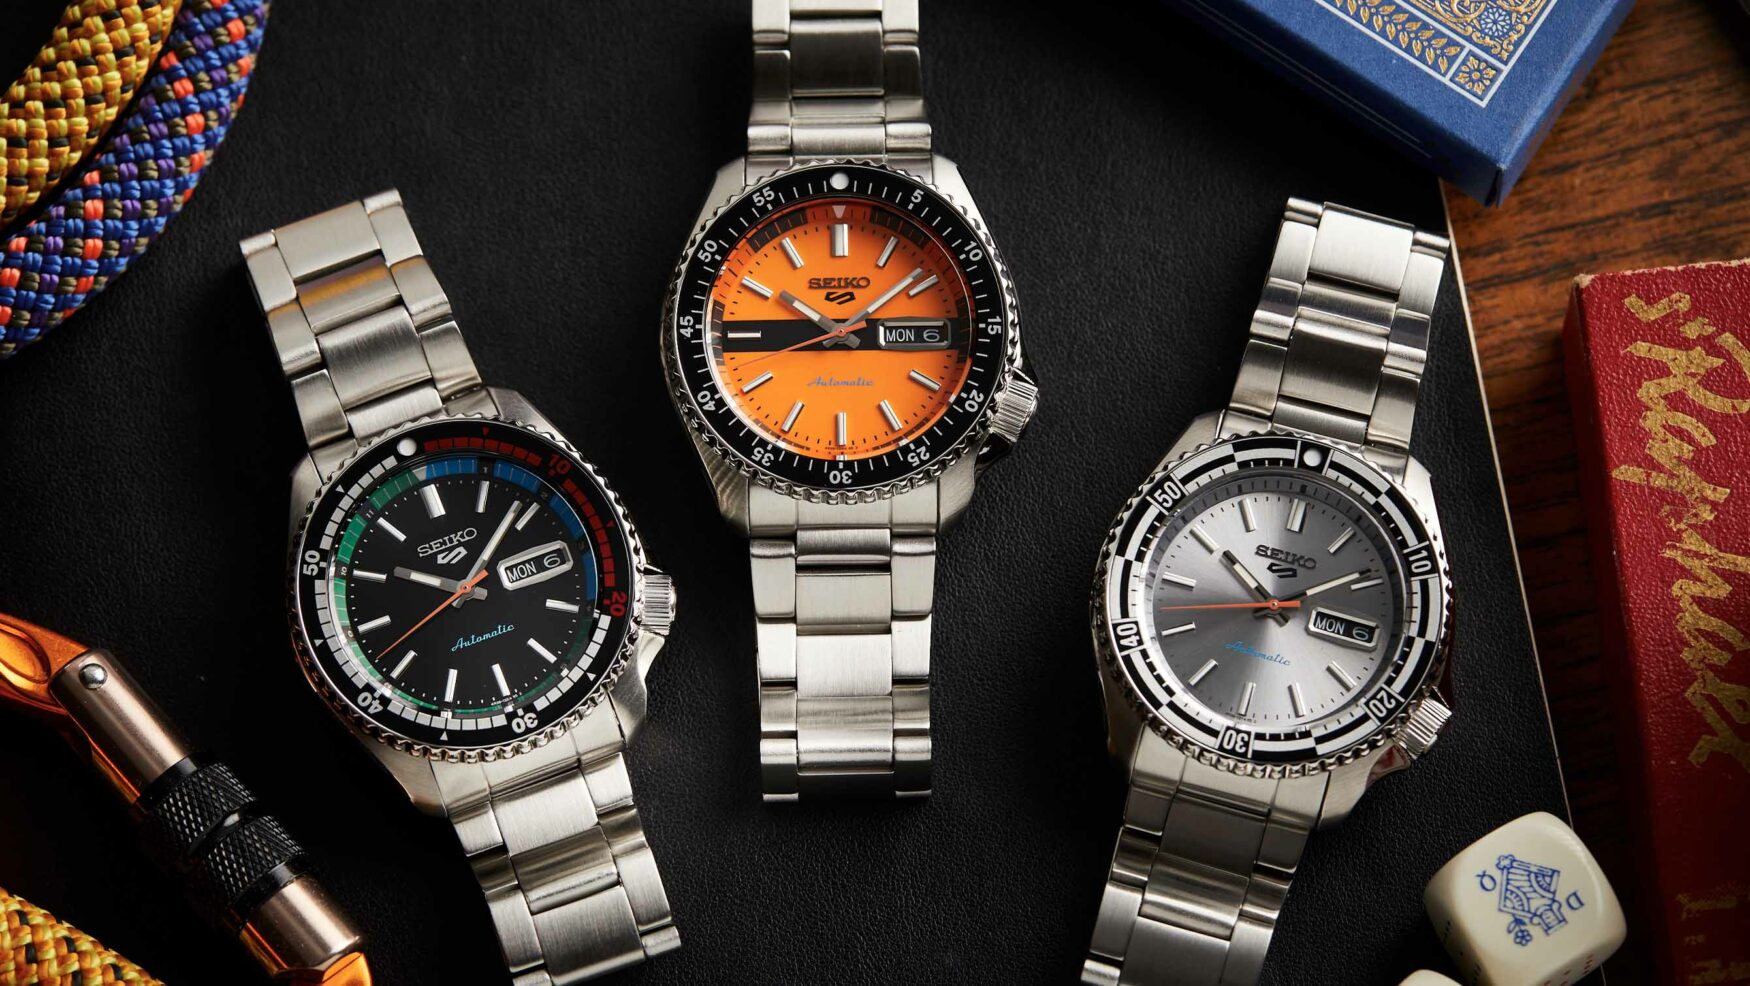 HANDS-ON: The Seiko 5 Sports retro colour collection